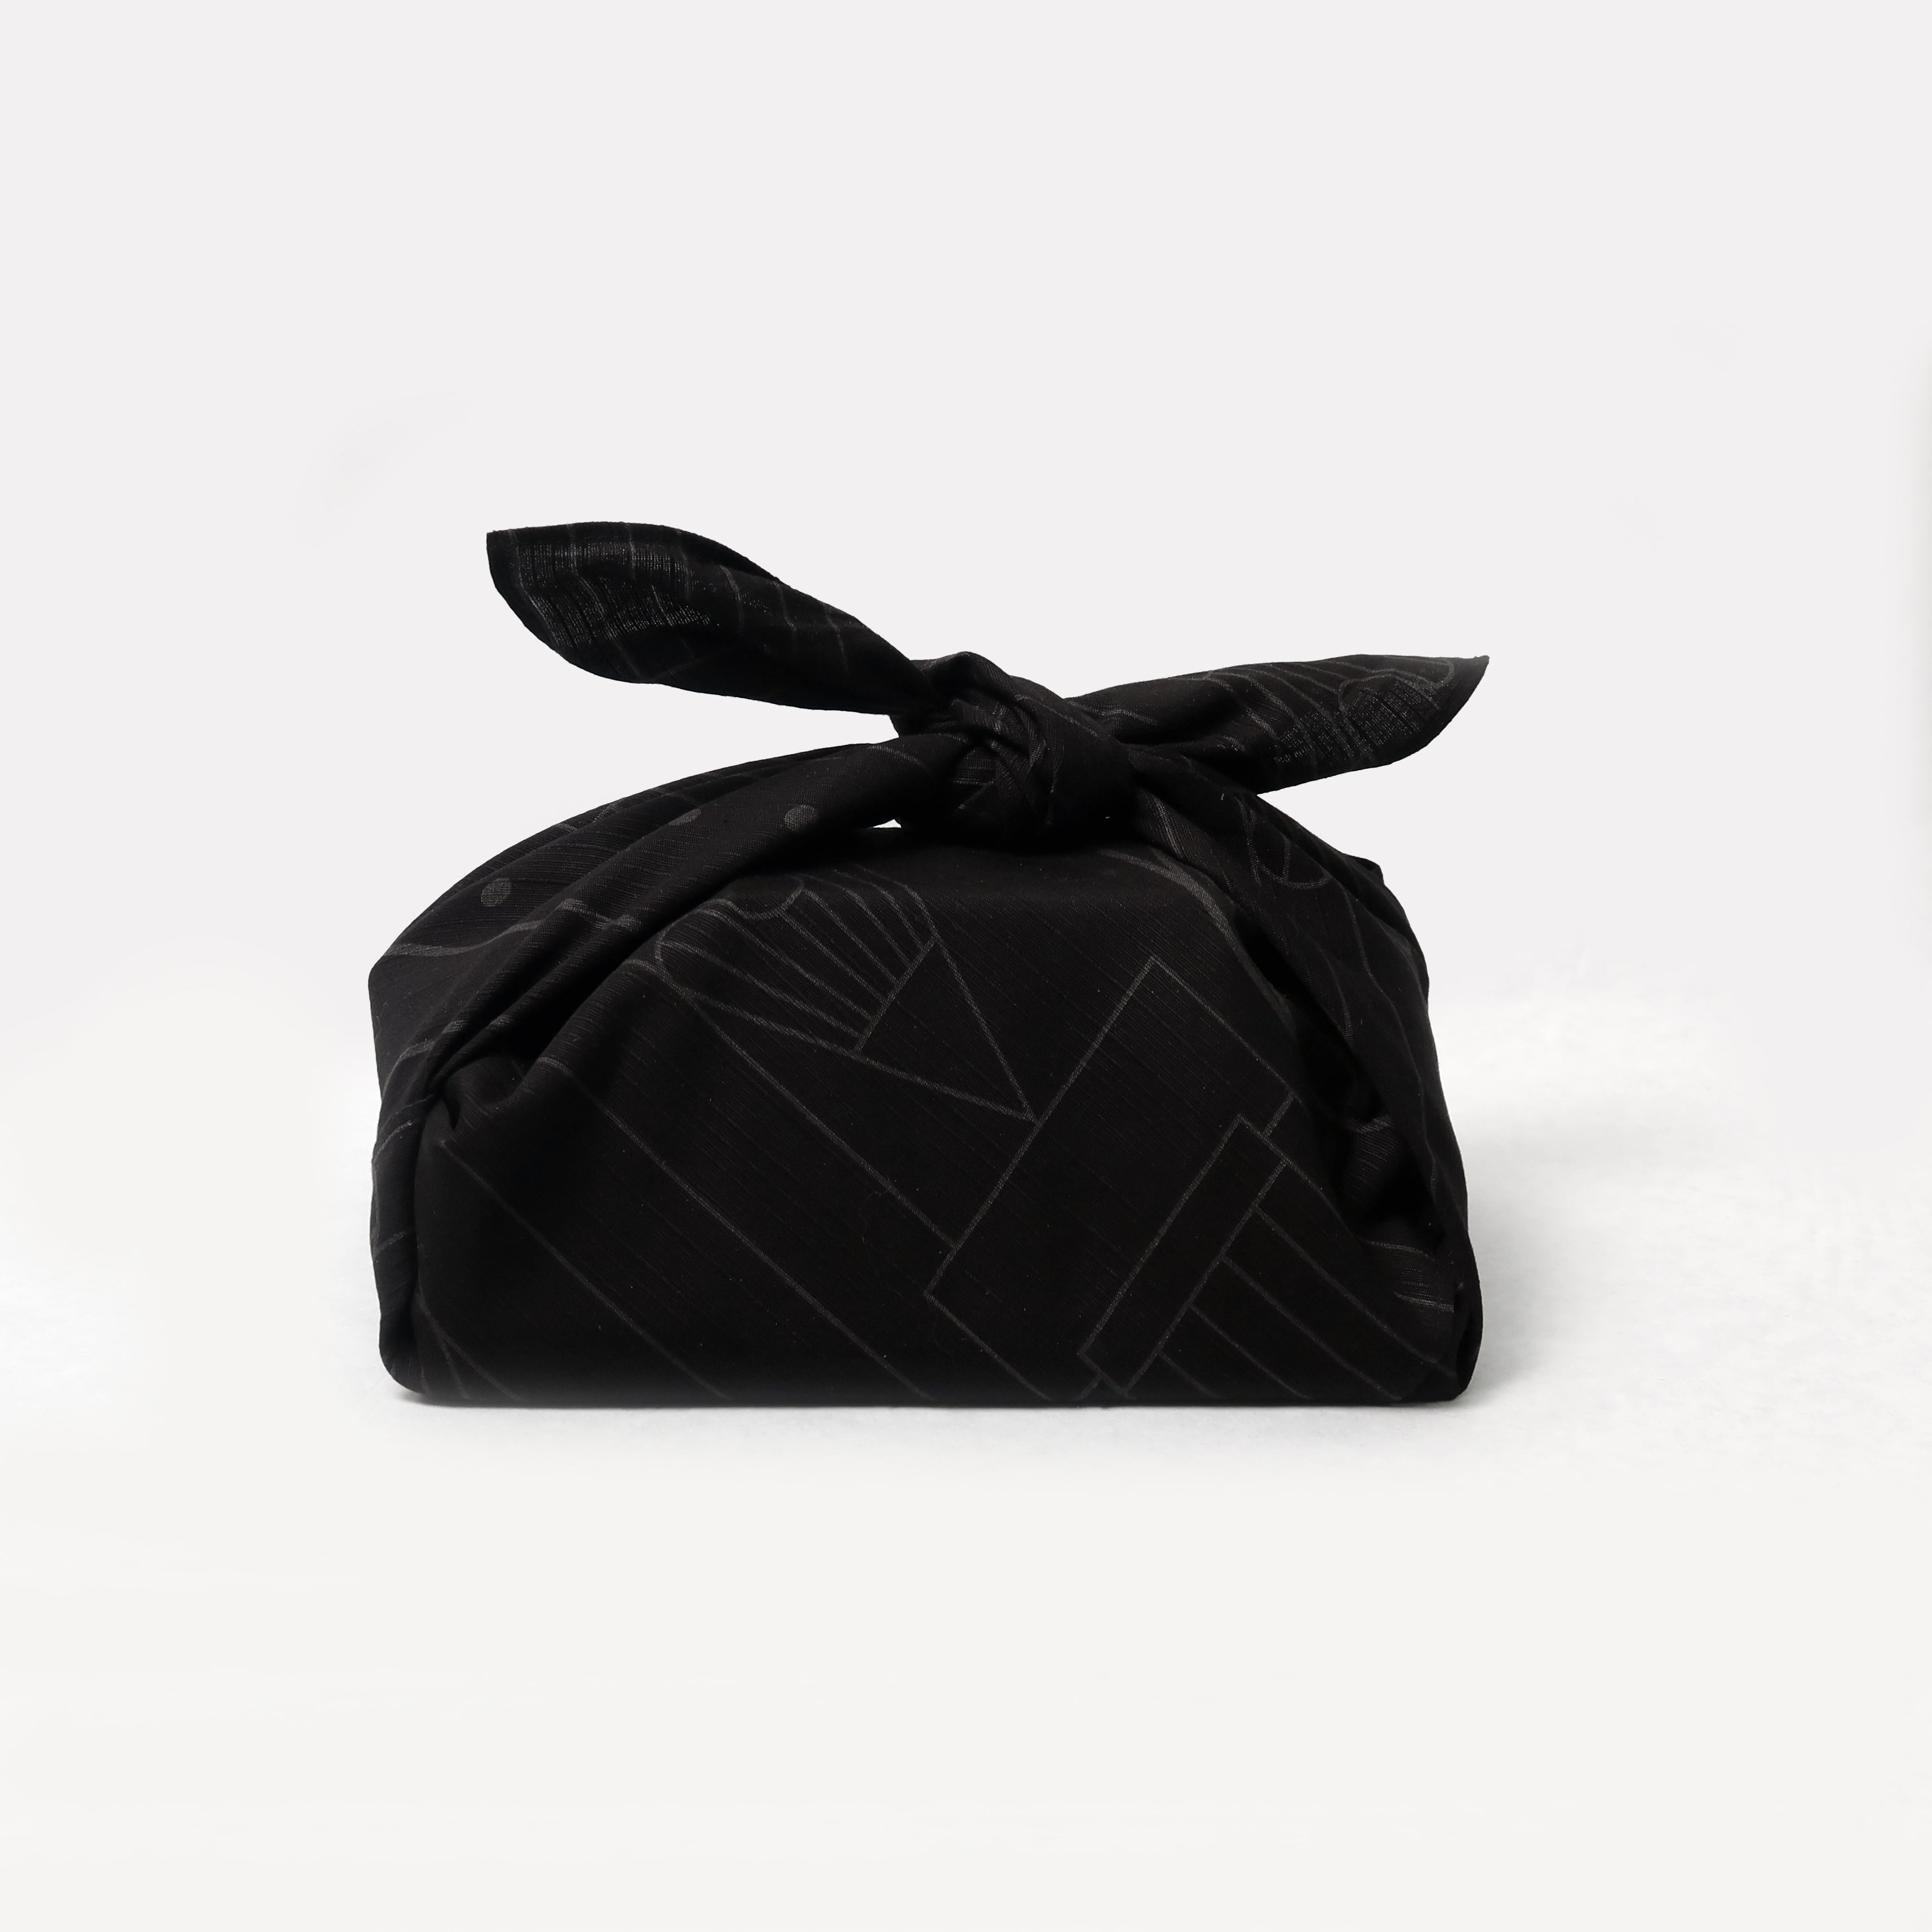 A black bag with a Blackwing Furoshiki (Japanese Cloth Wrapping Paper) tied around it.